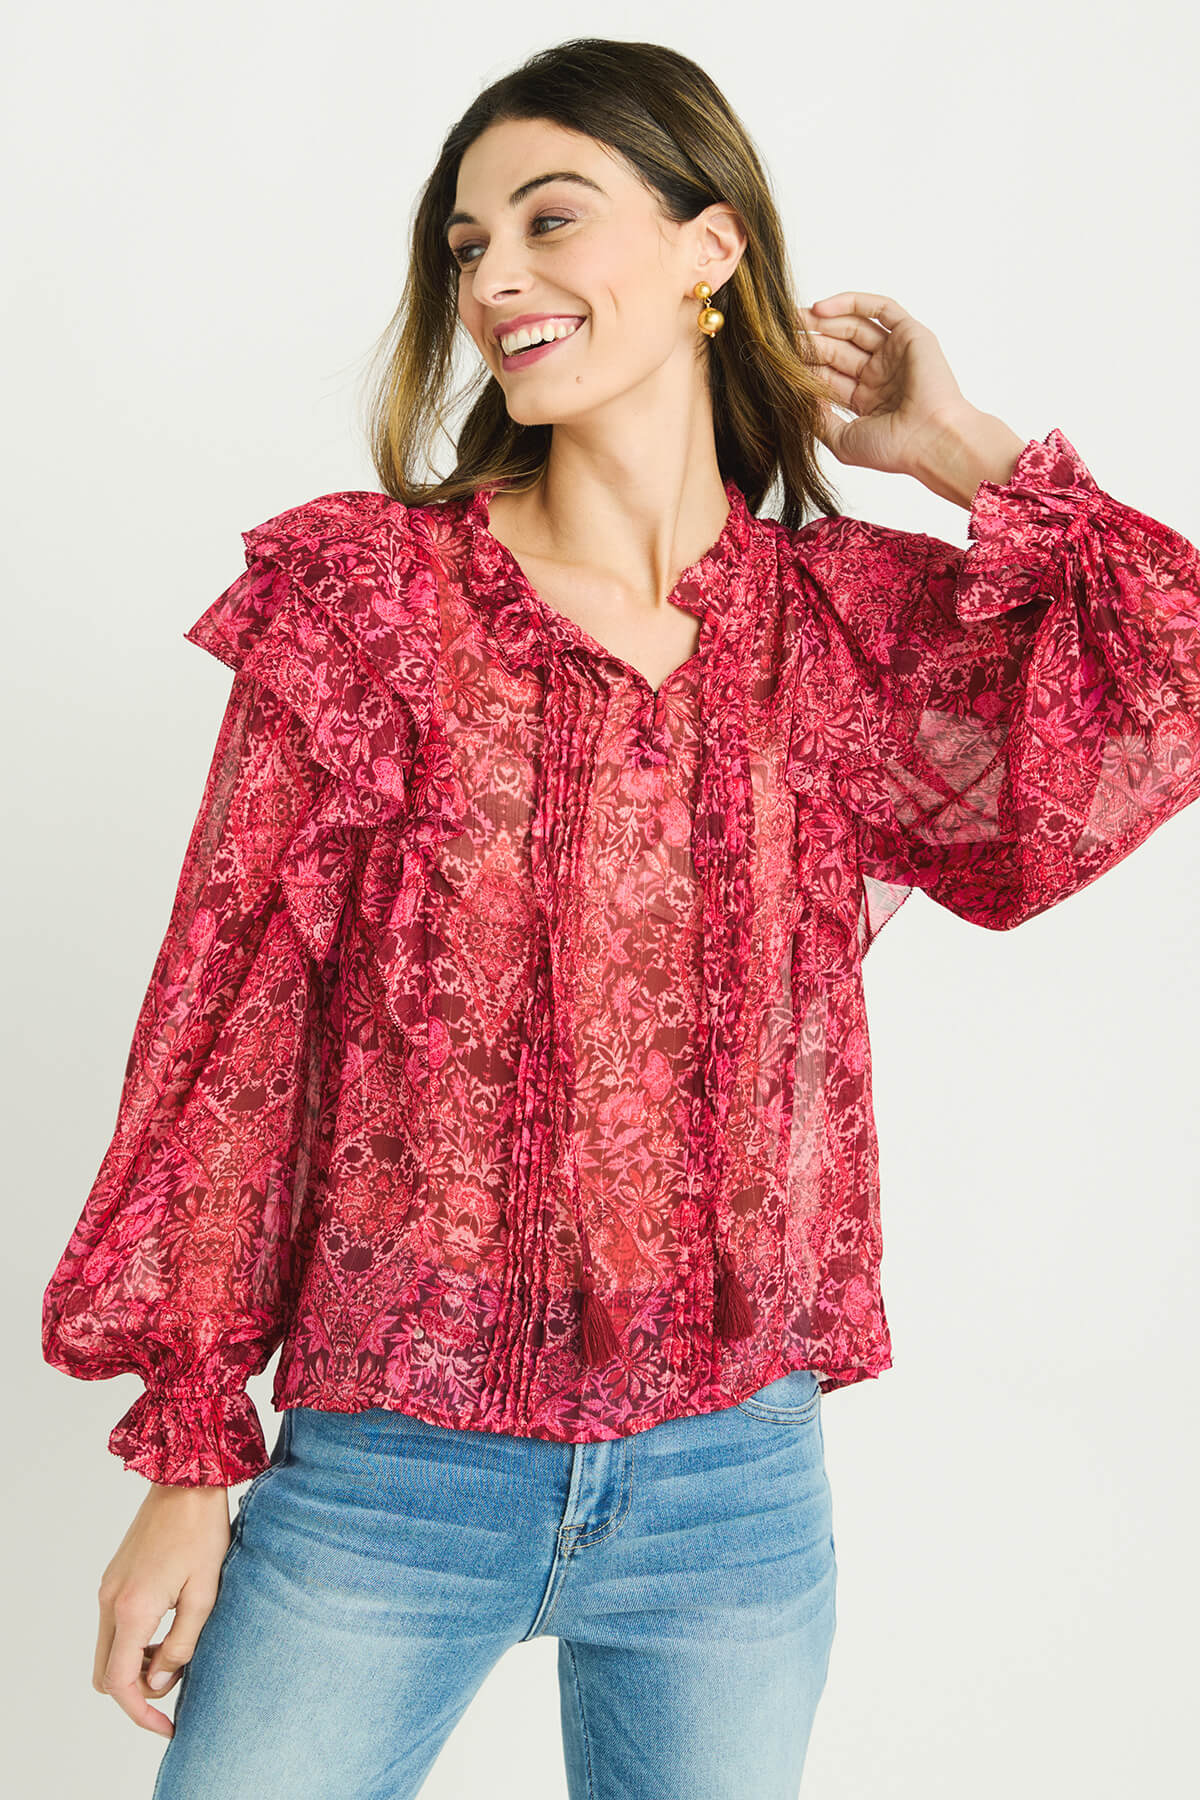 Olivaceous Libby Top